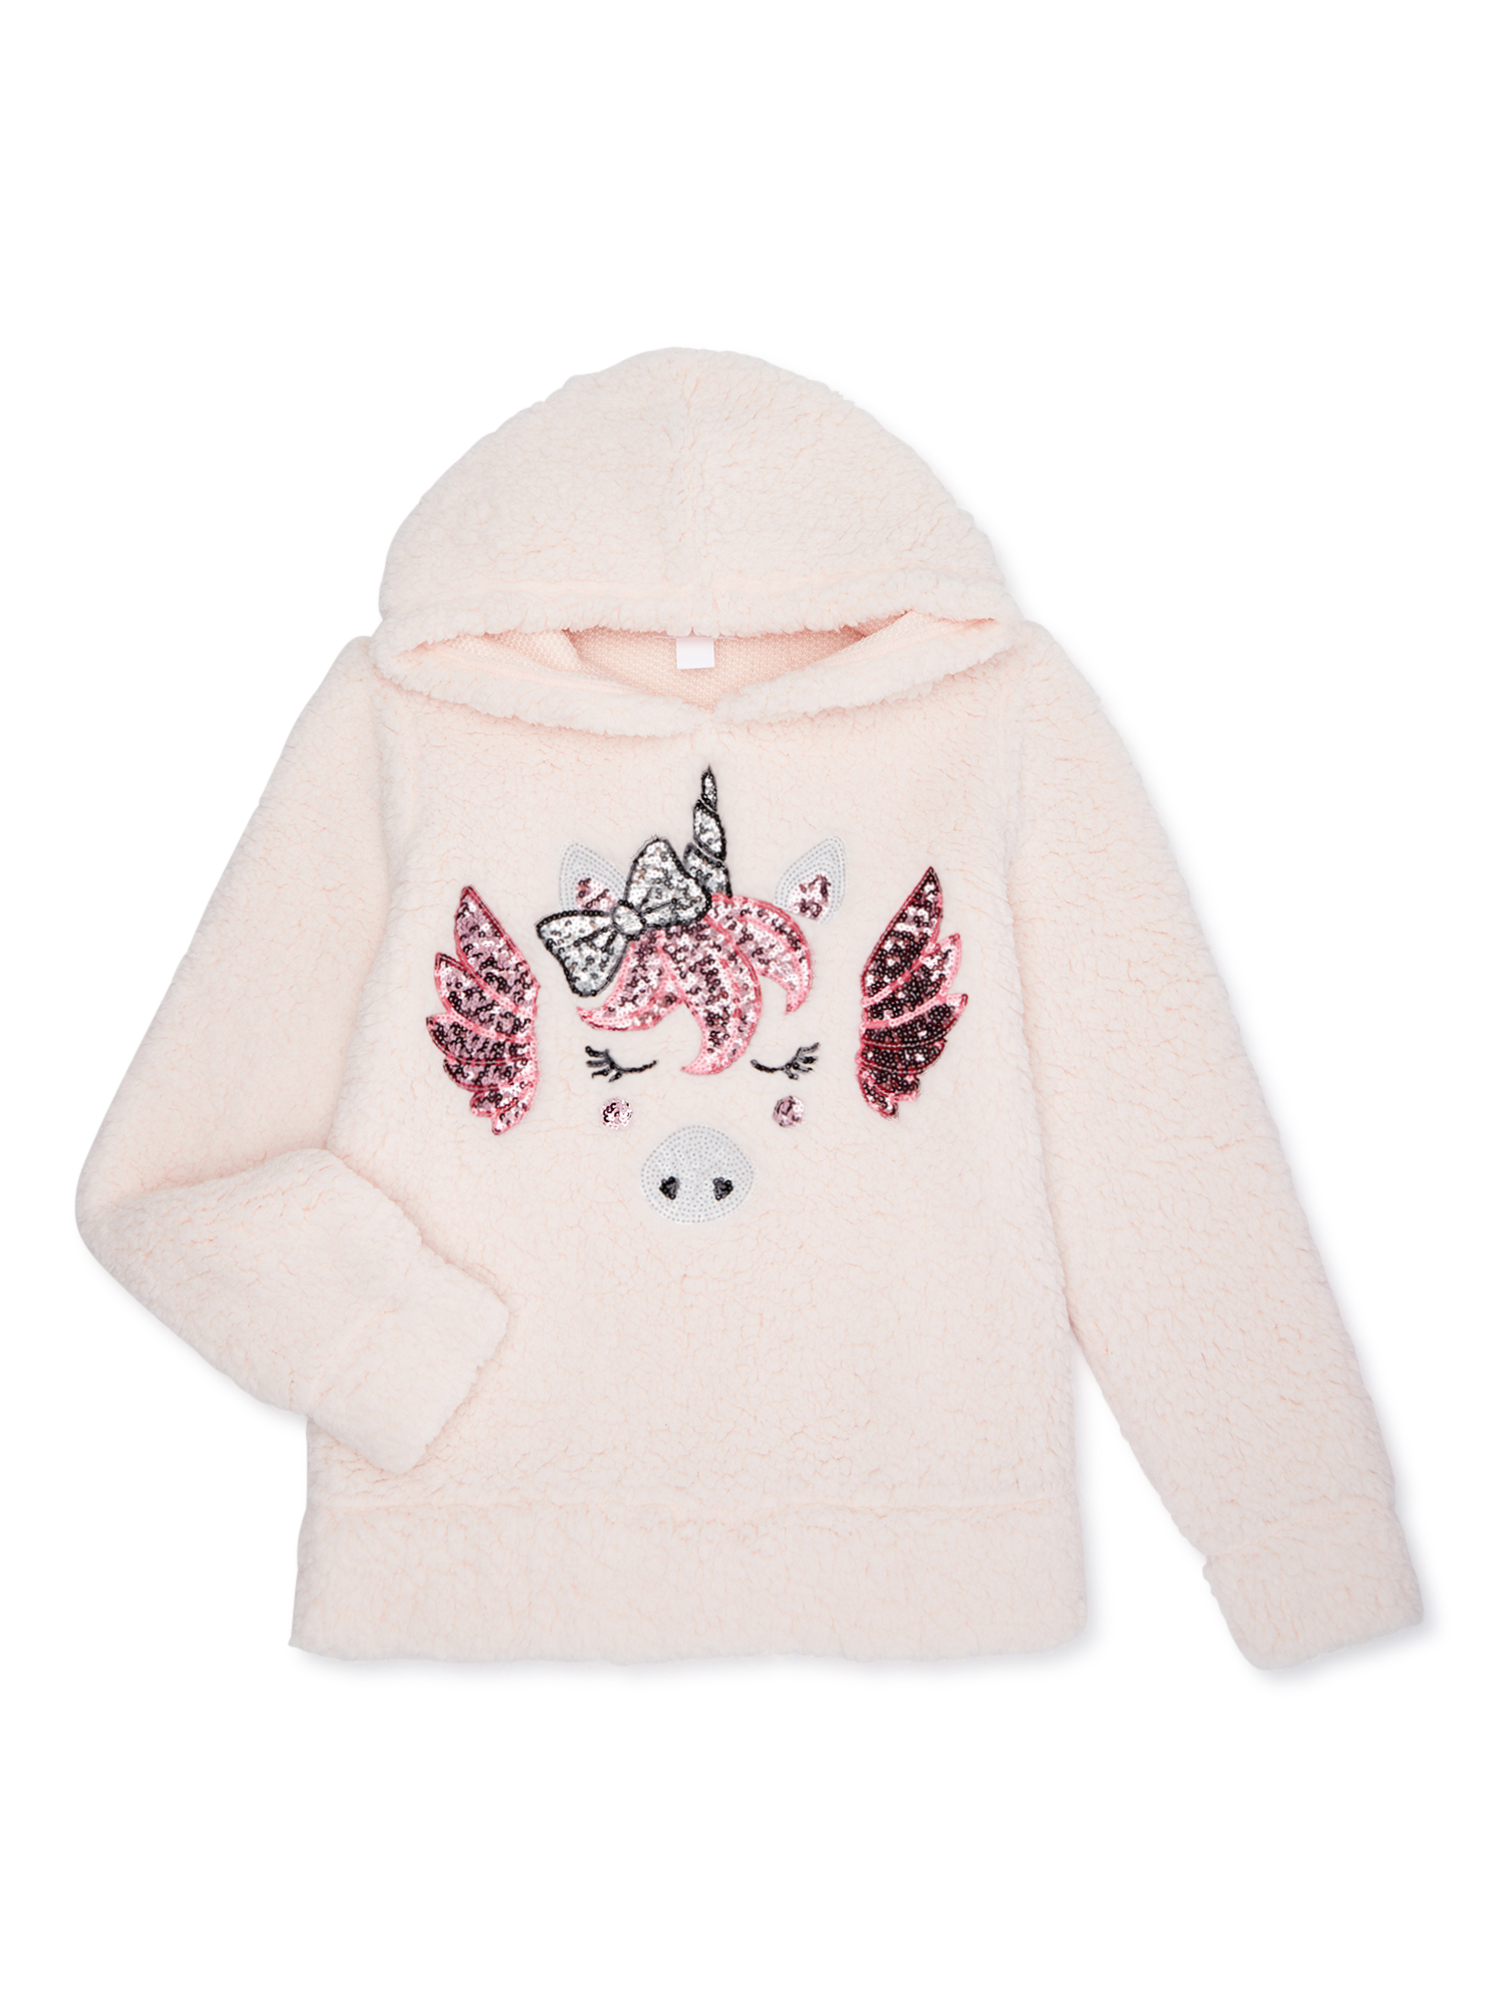 Miss Chievous Girls 4-16 Sequin Critter Plush Sherpa Pullover Hoodie - image 1 of 3